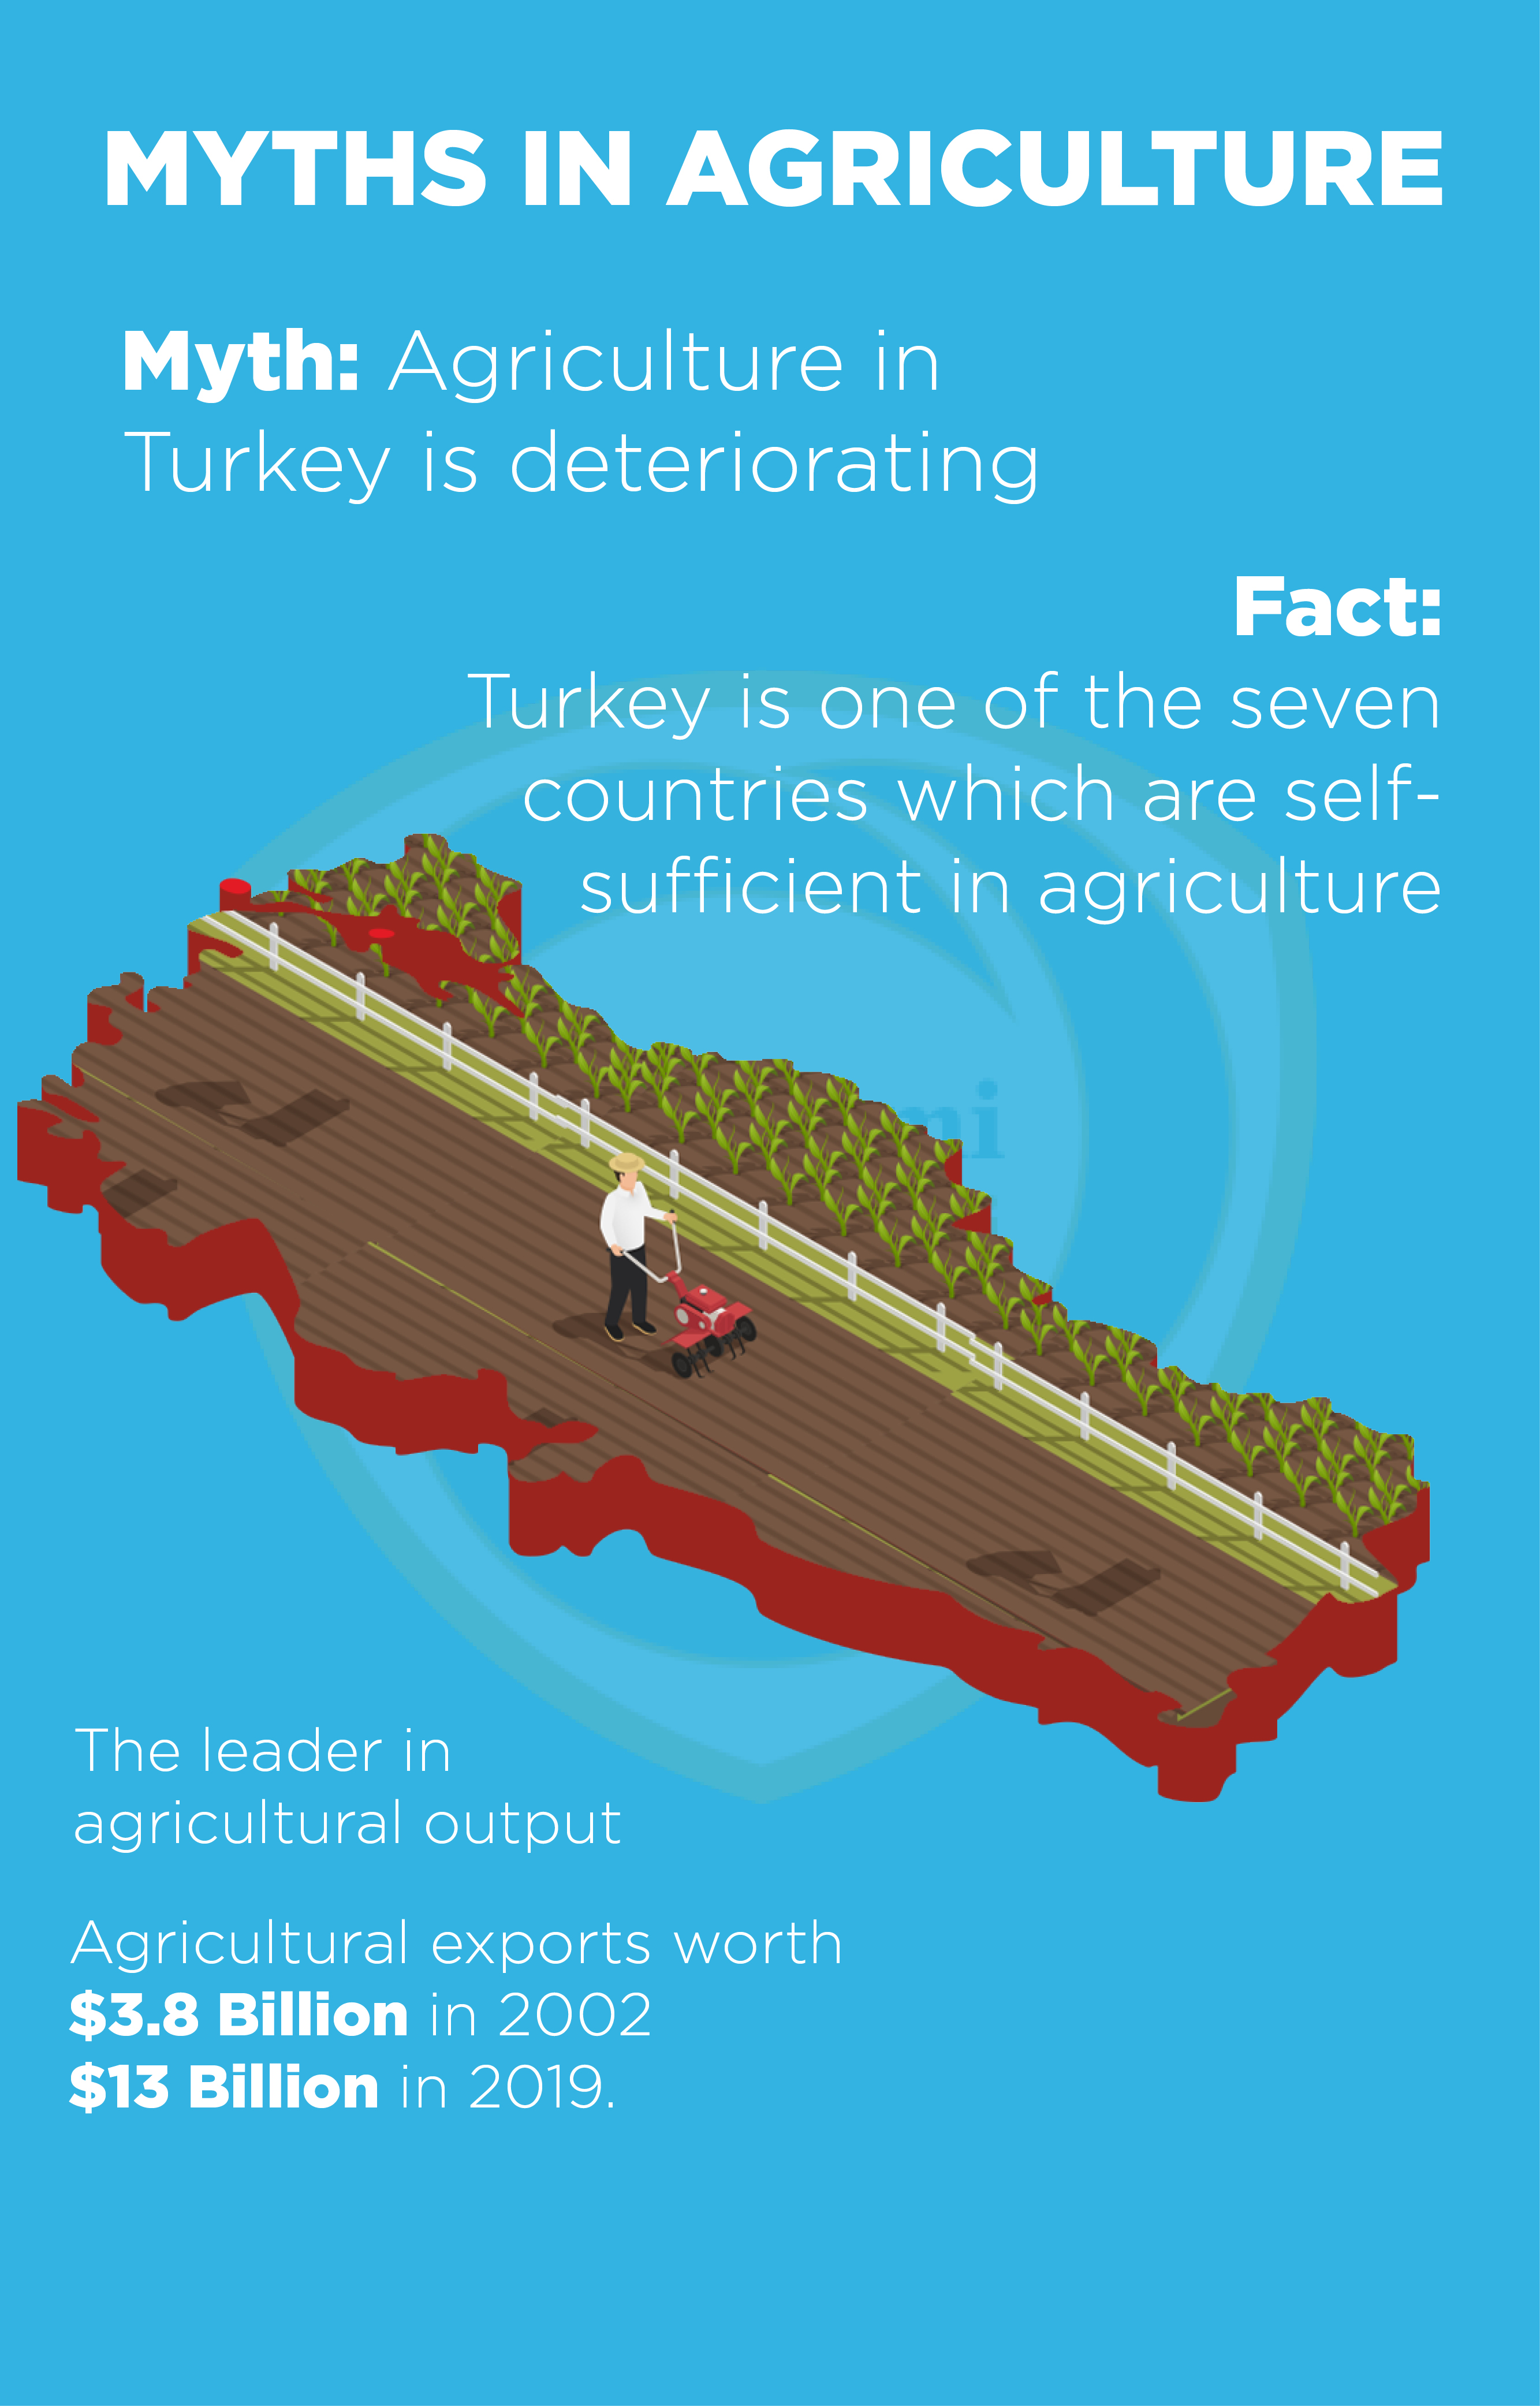 Agriculture in Turkey is growing